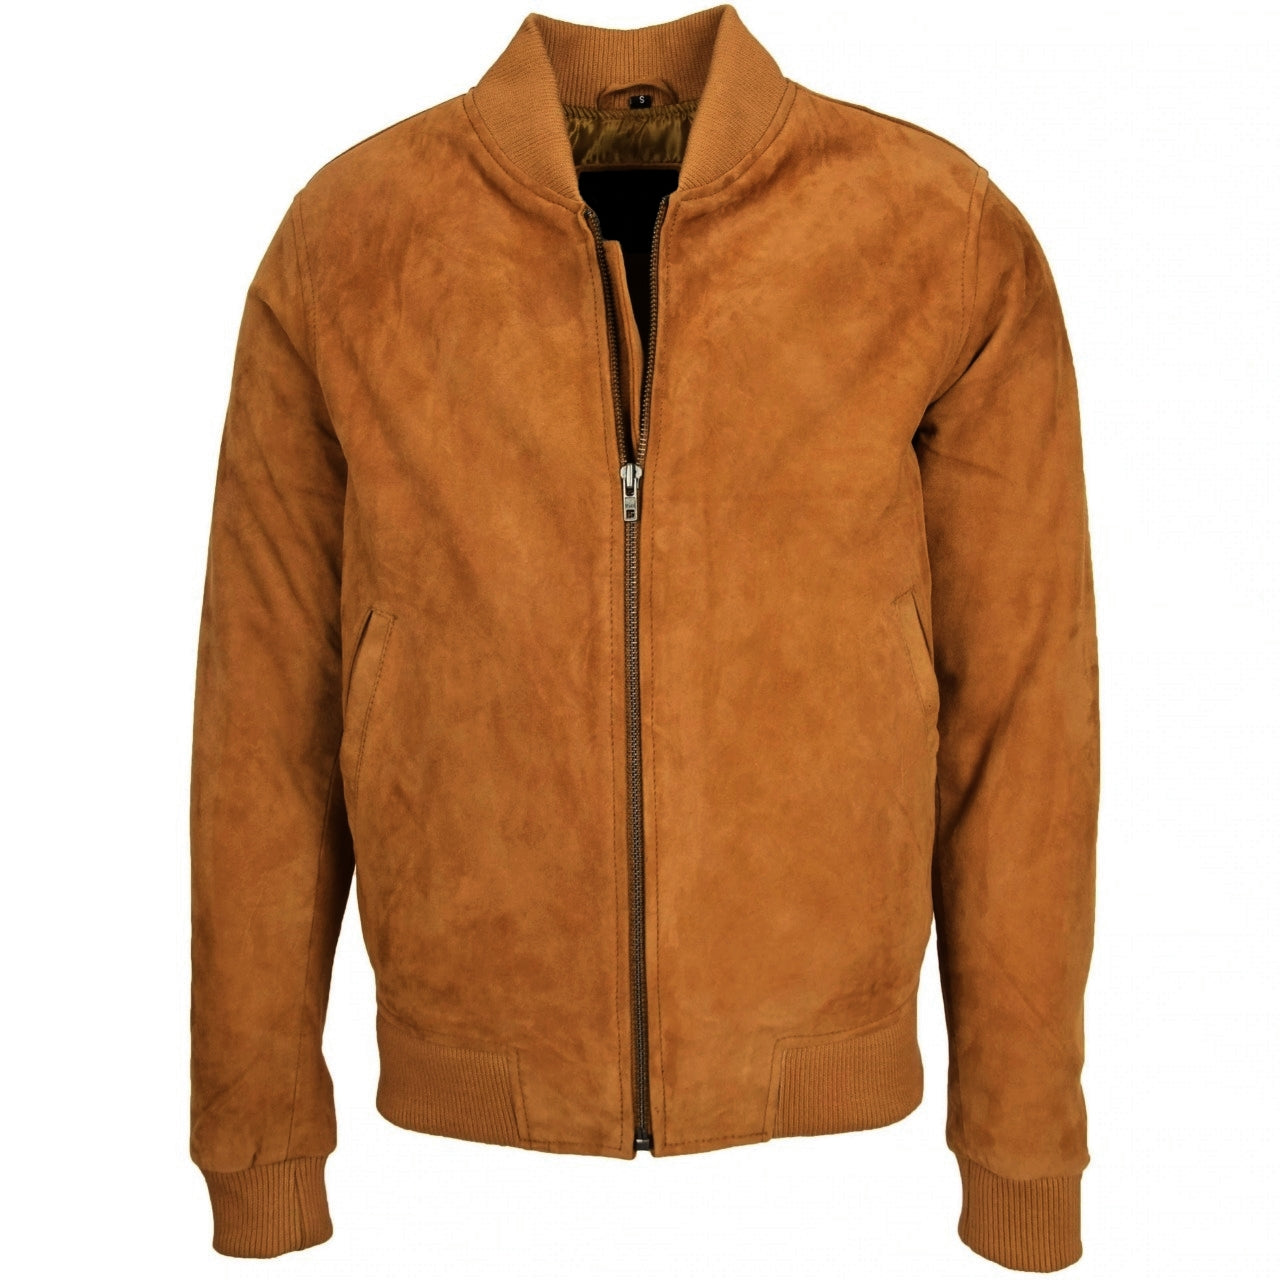 A2 Bomber Men's Brown Suede Leather Jacket